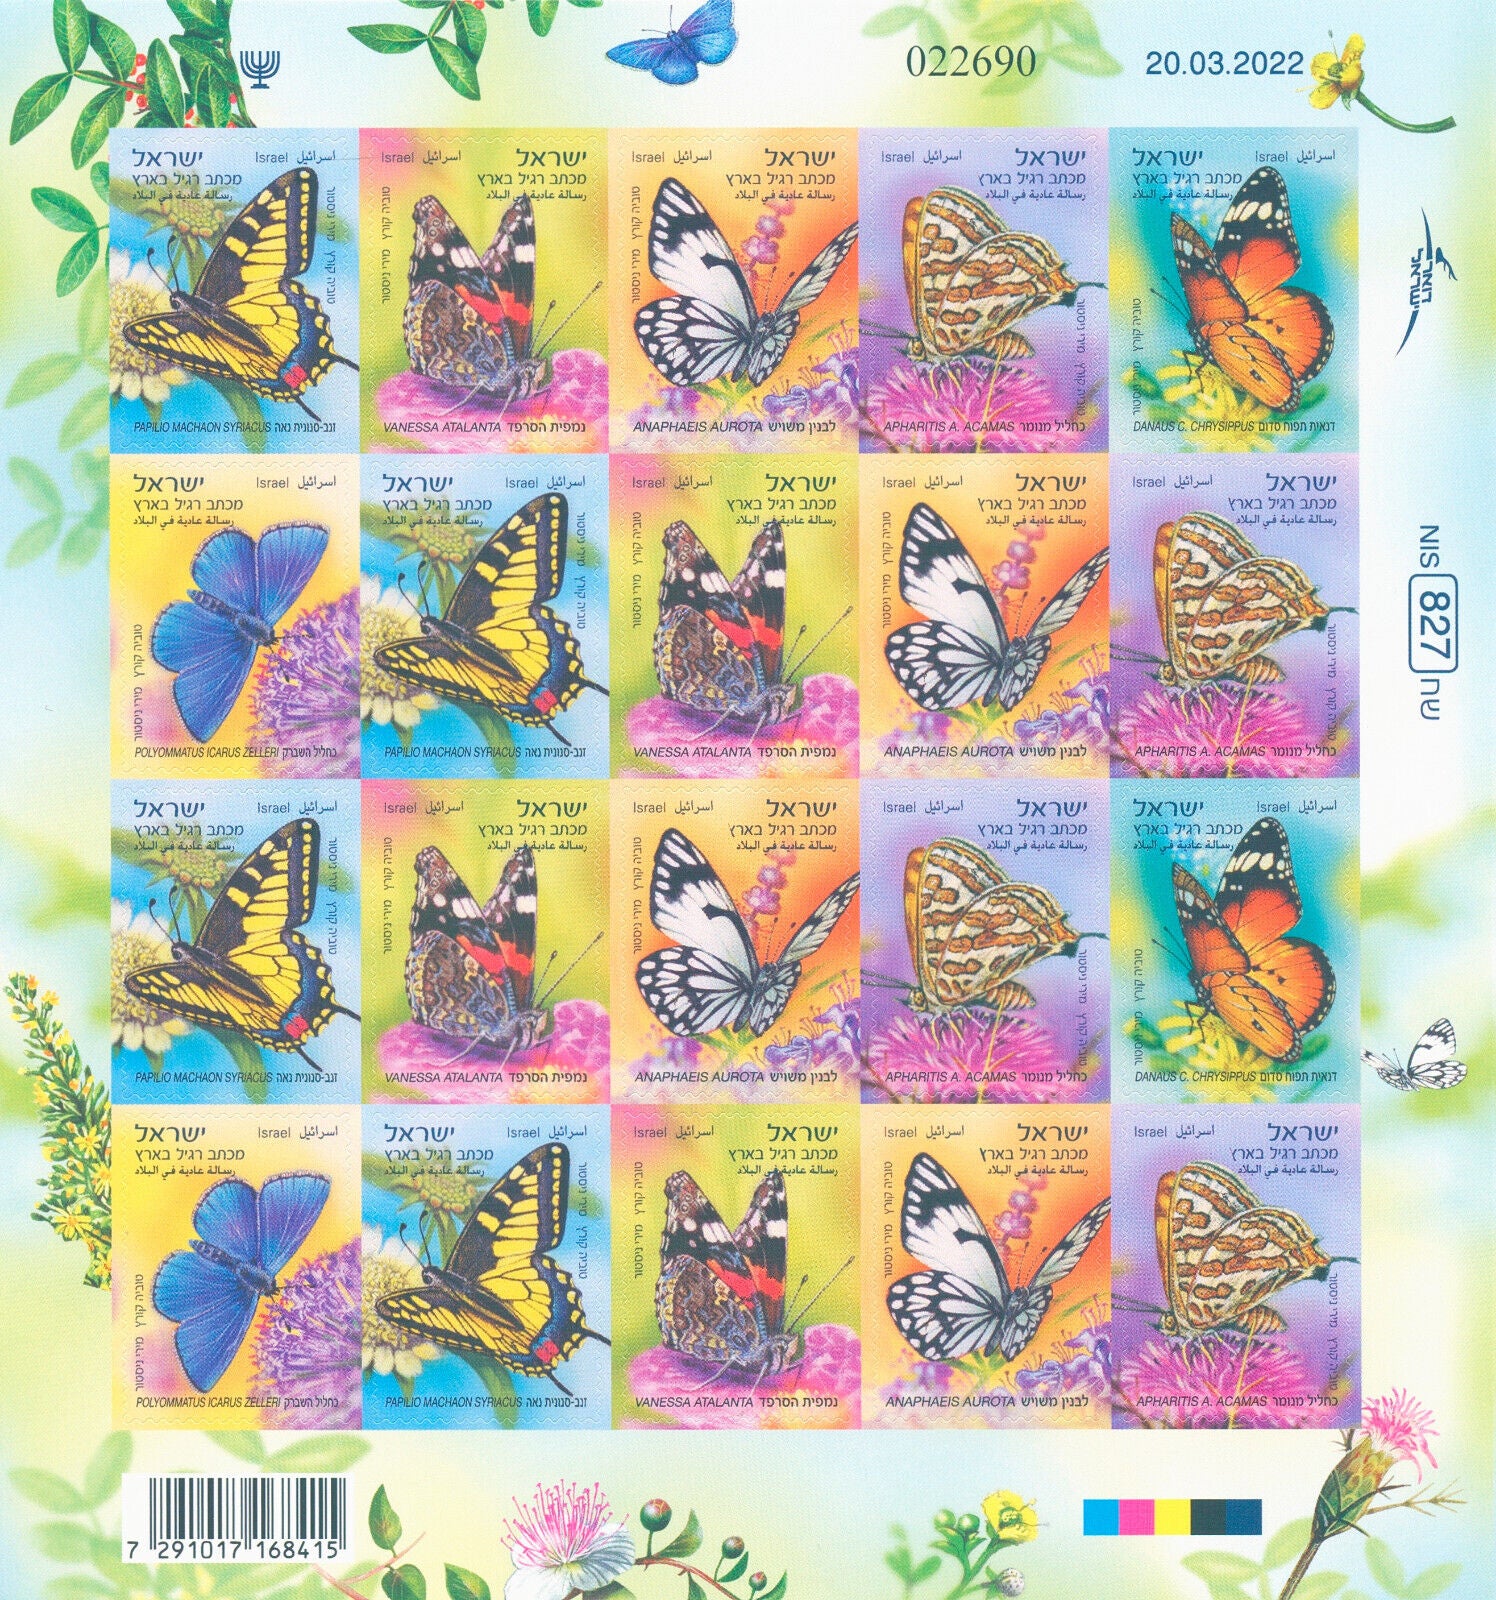 Israel 2022 MNH Butterflies Stamps Swallowtail Plain Tiger Butterfly 20v S/A M/S